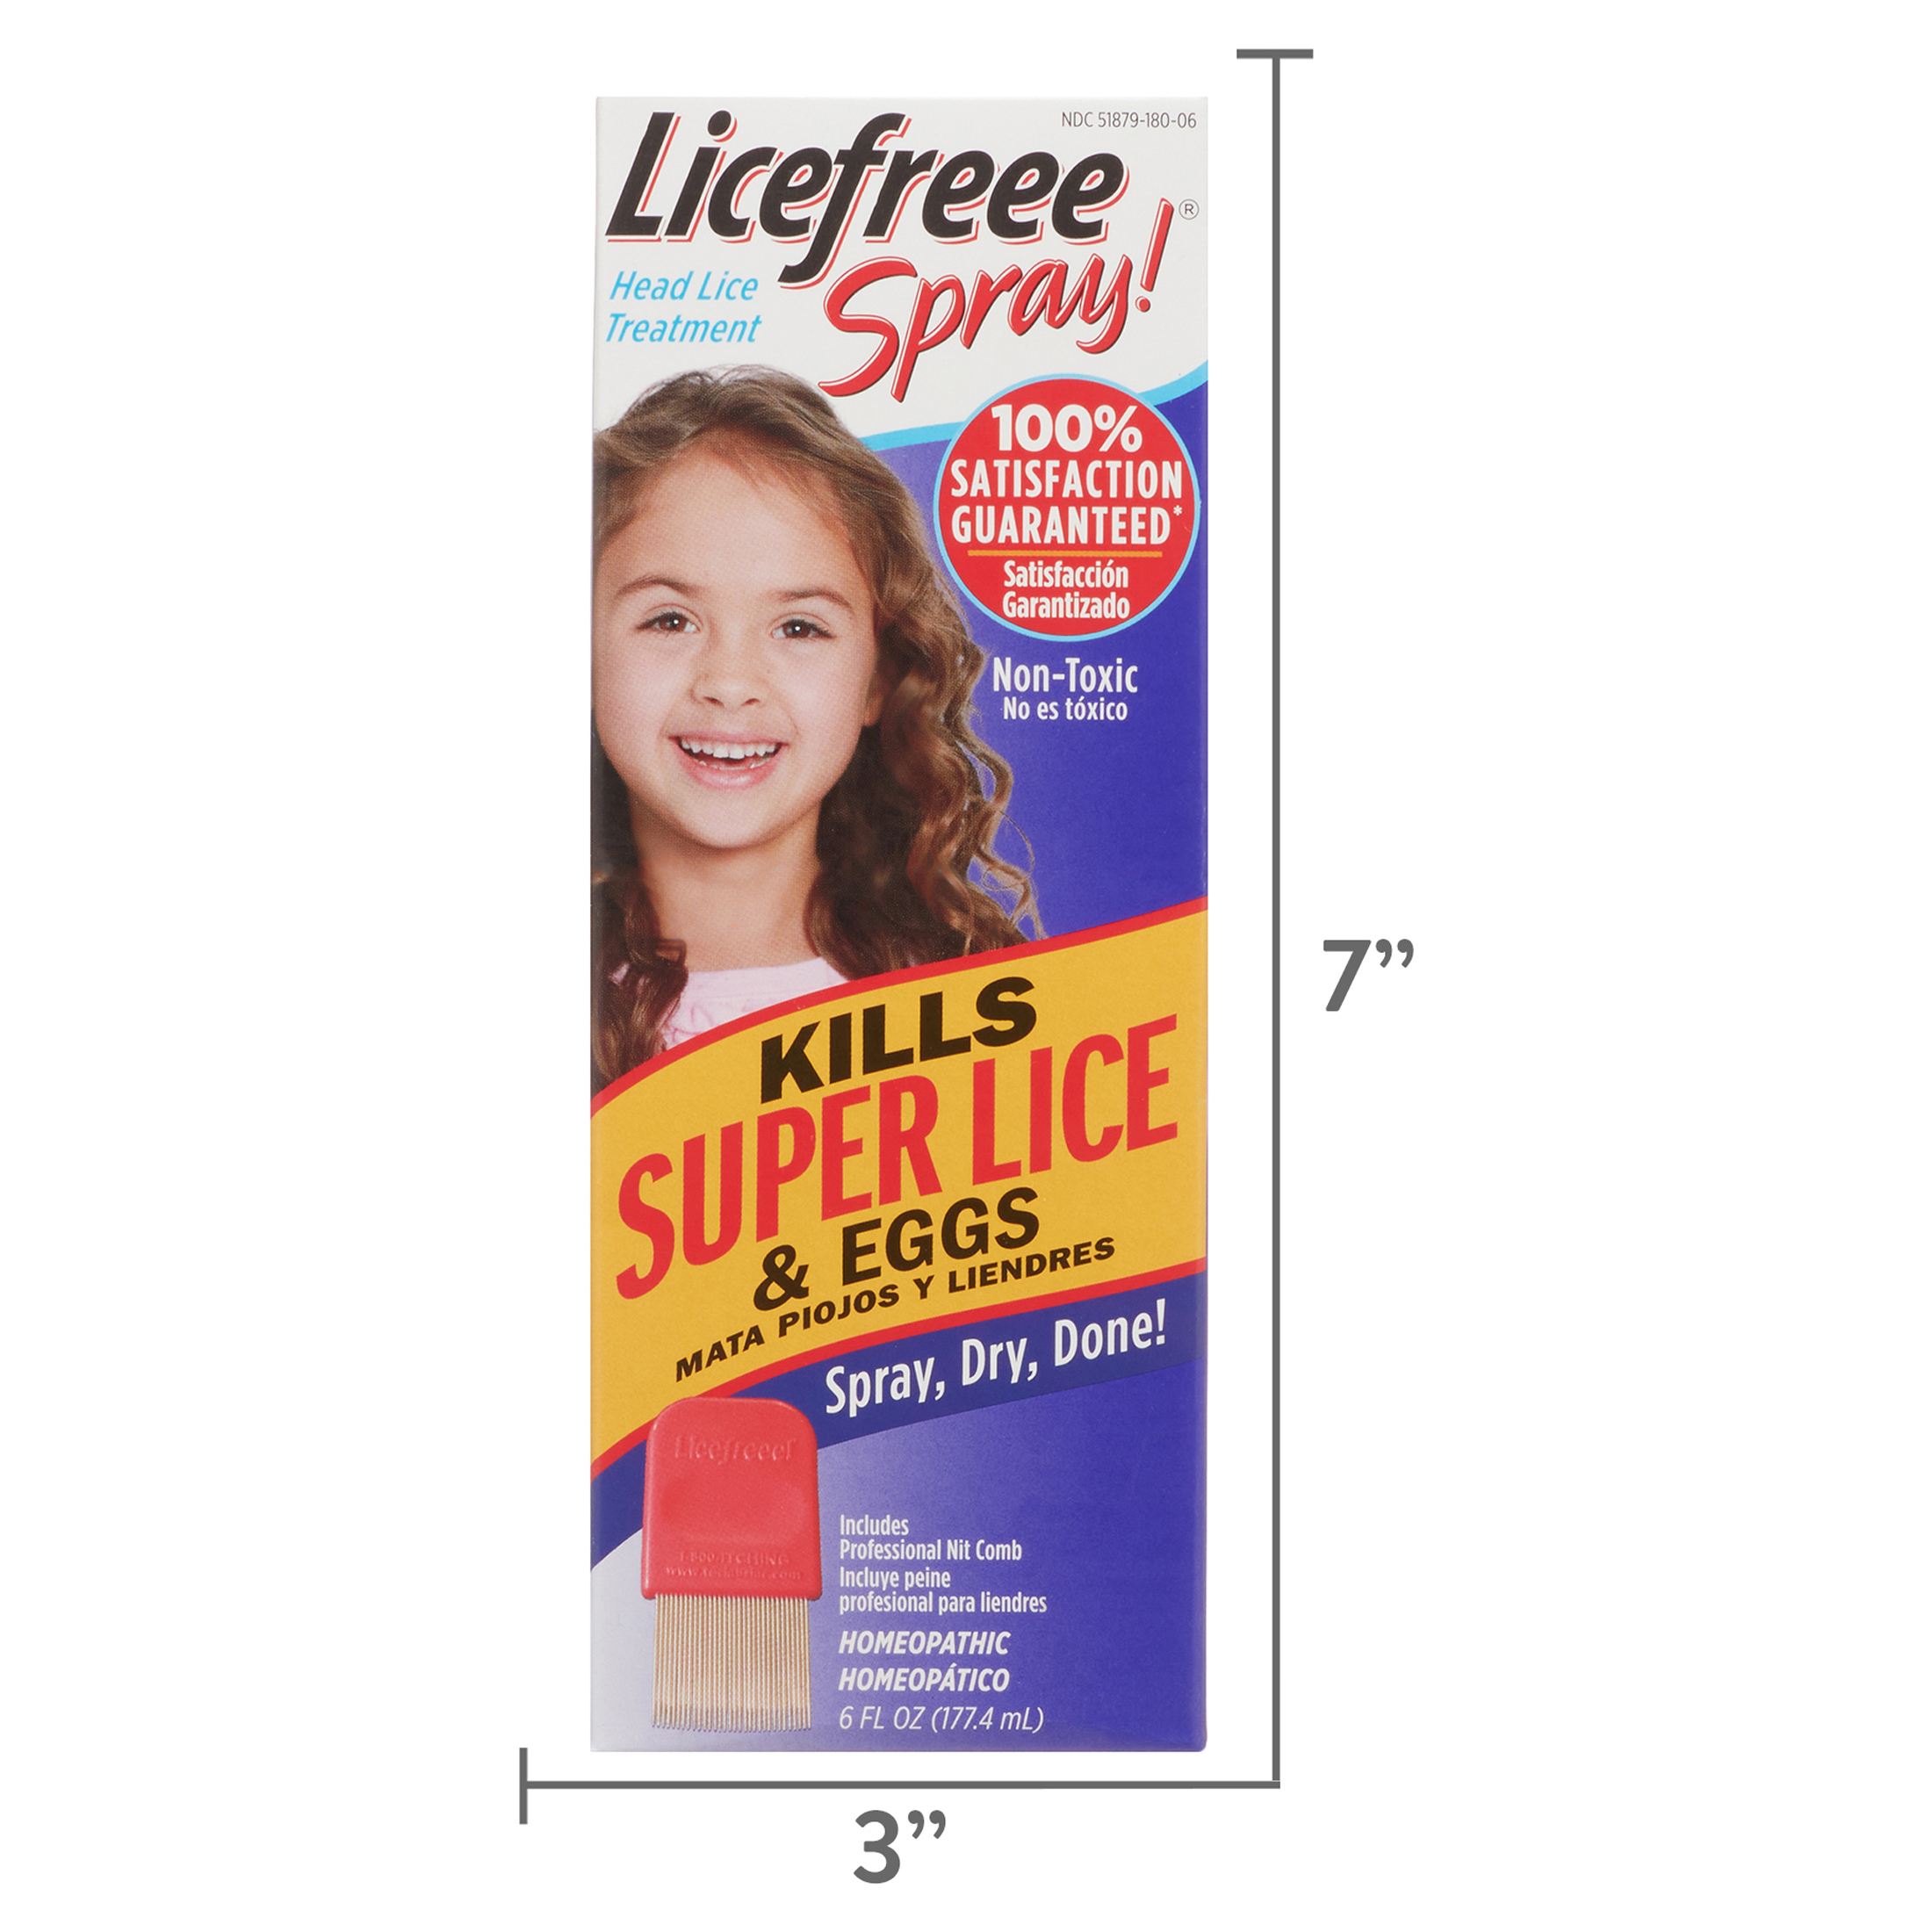 Licefreee Spray! Instant Head Lice Treatment, 6.0 fl oz - image 2 of 18